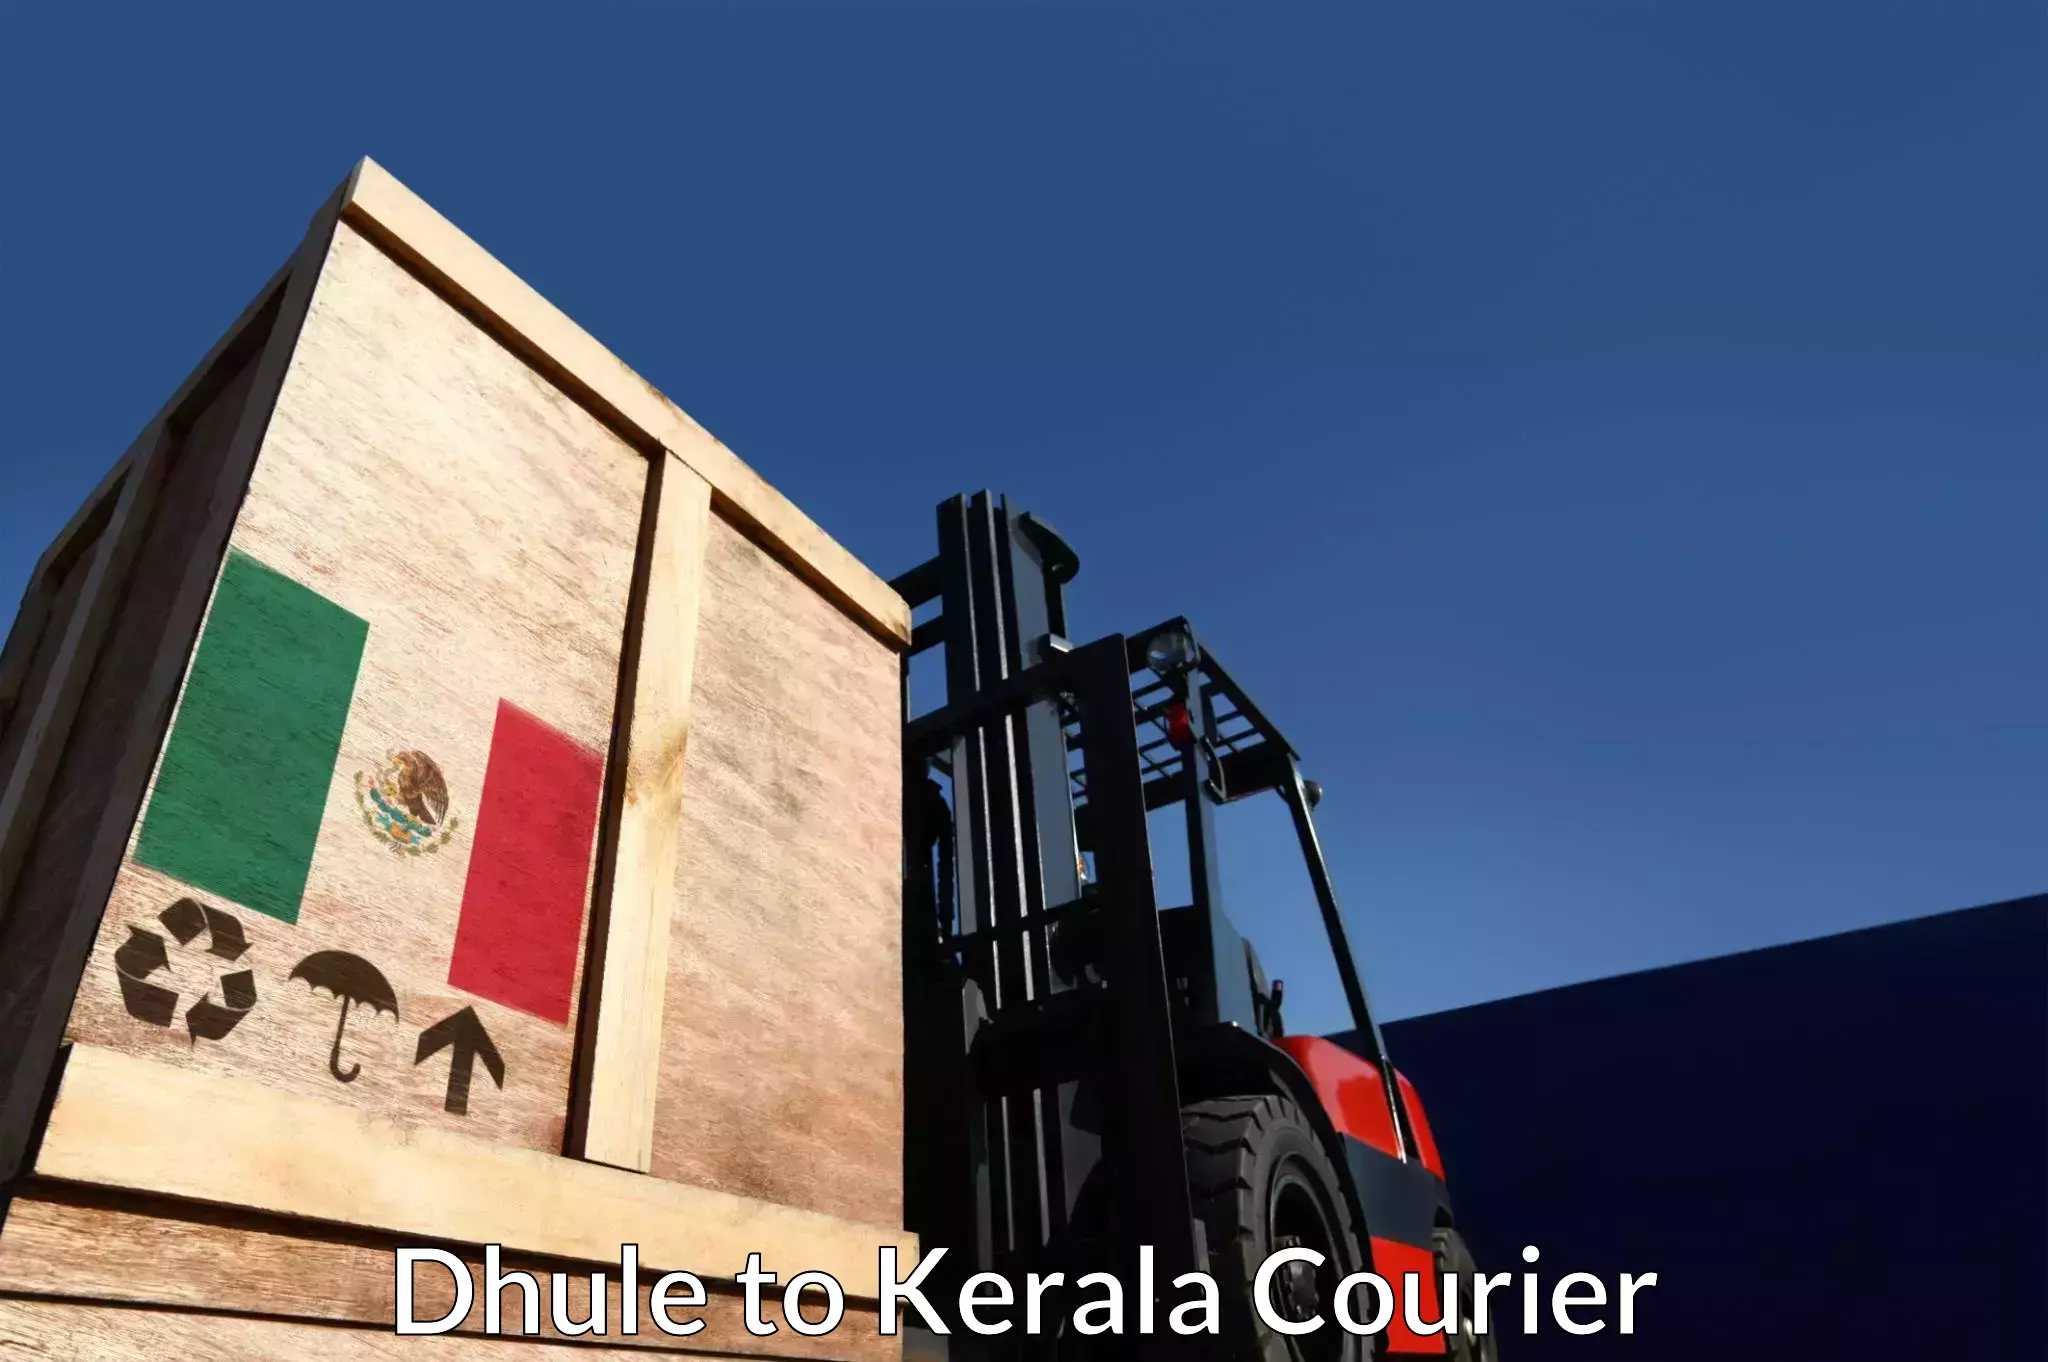 Customer-focused courier Dhule to Rajamudy